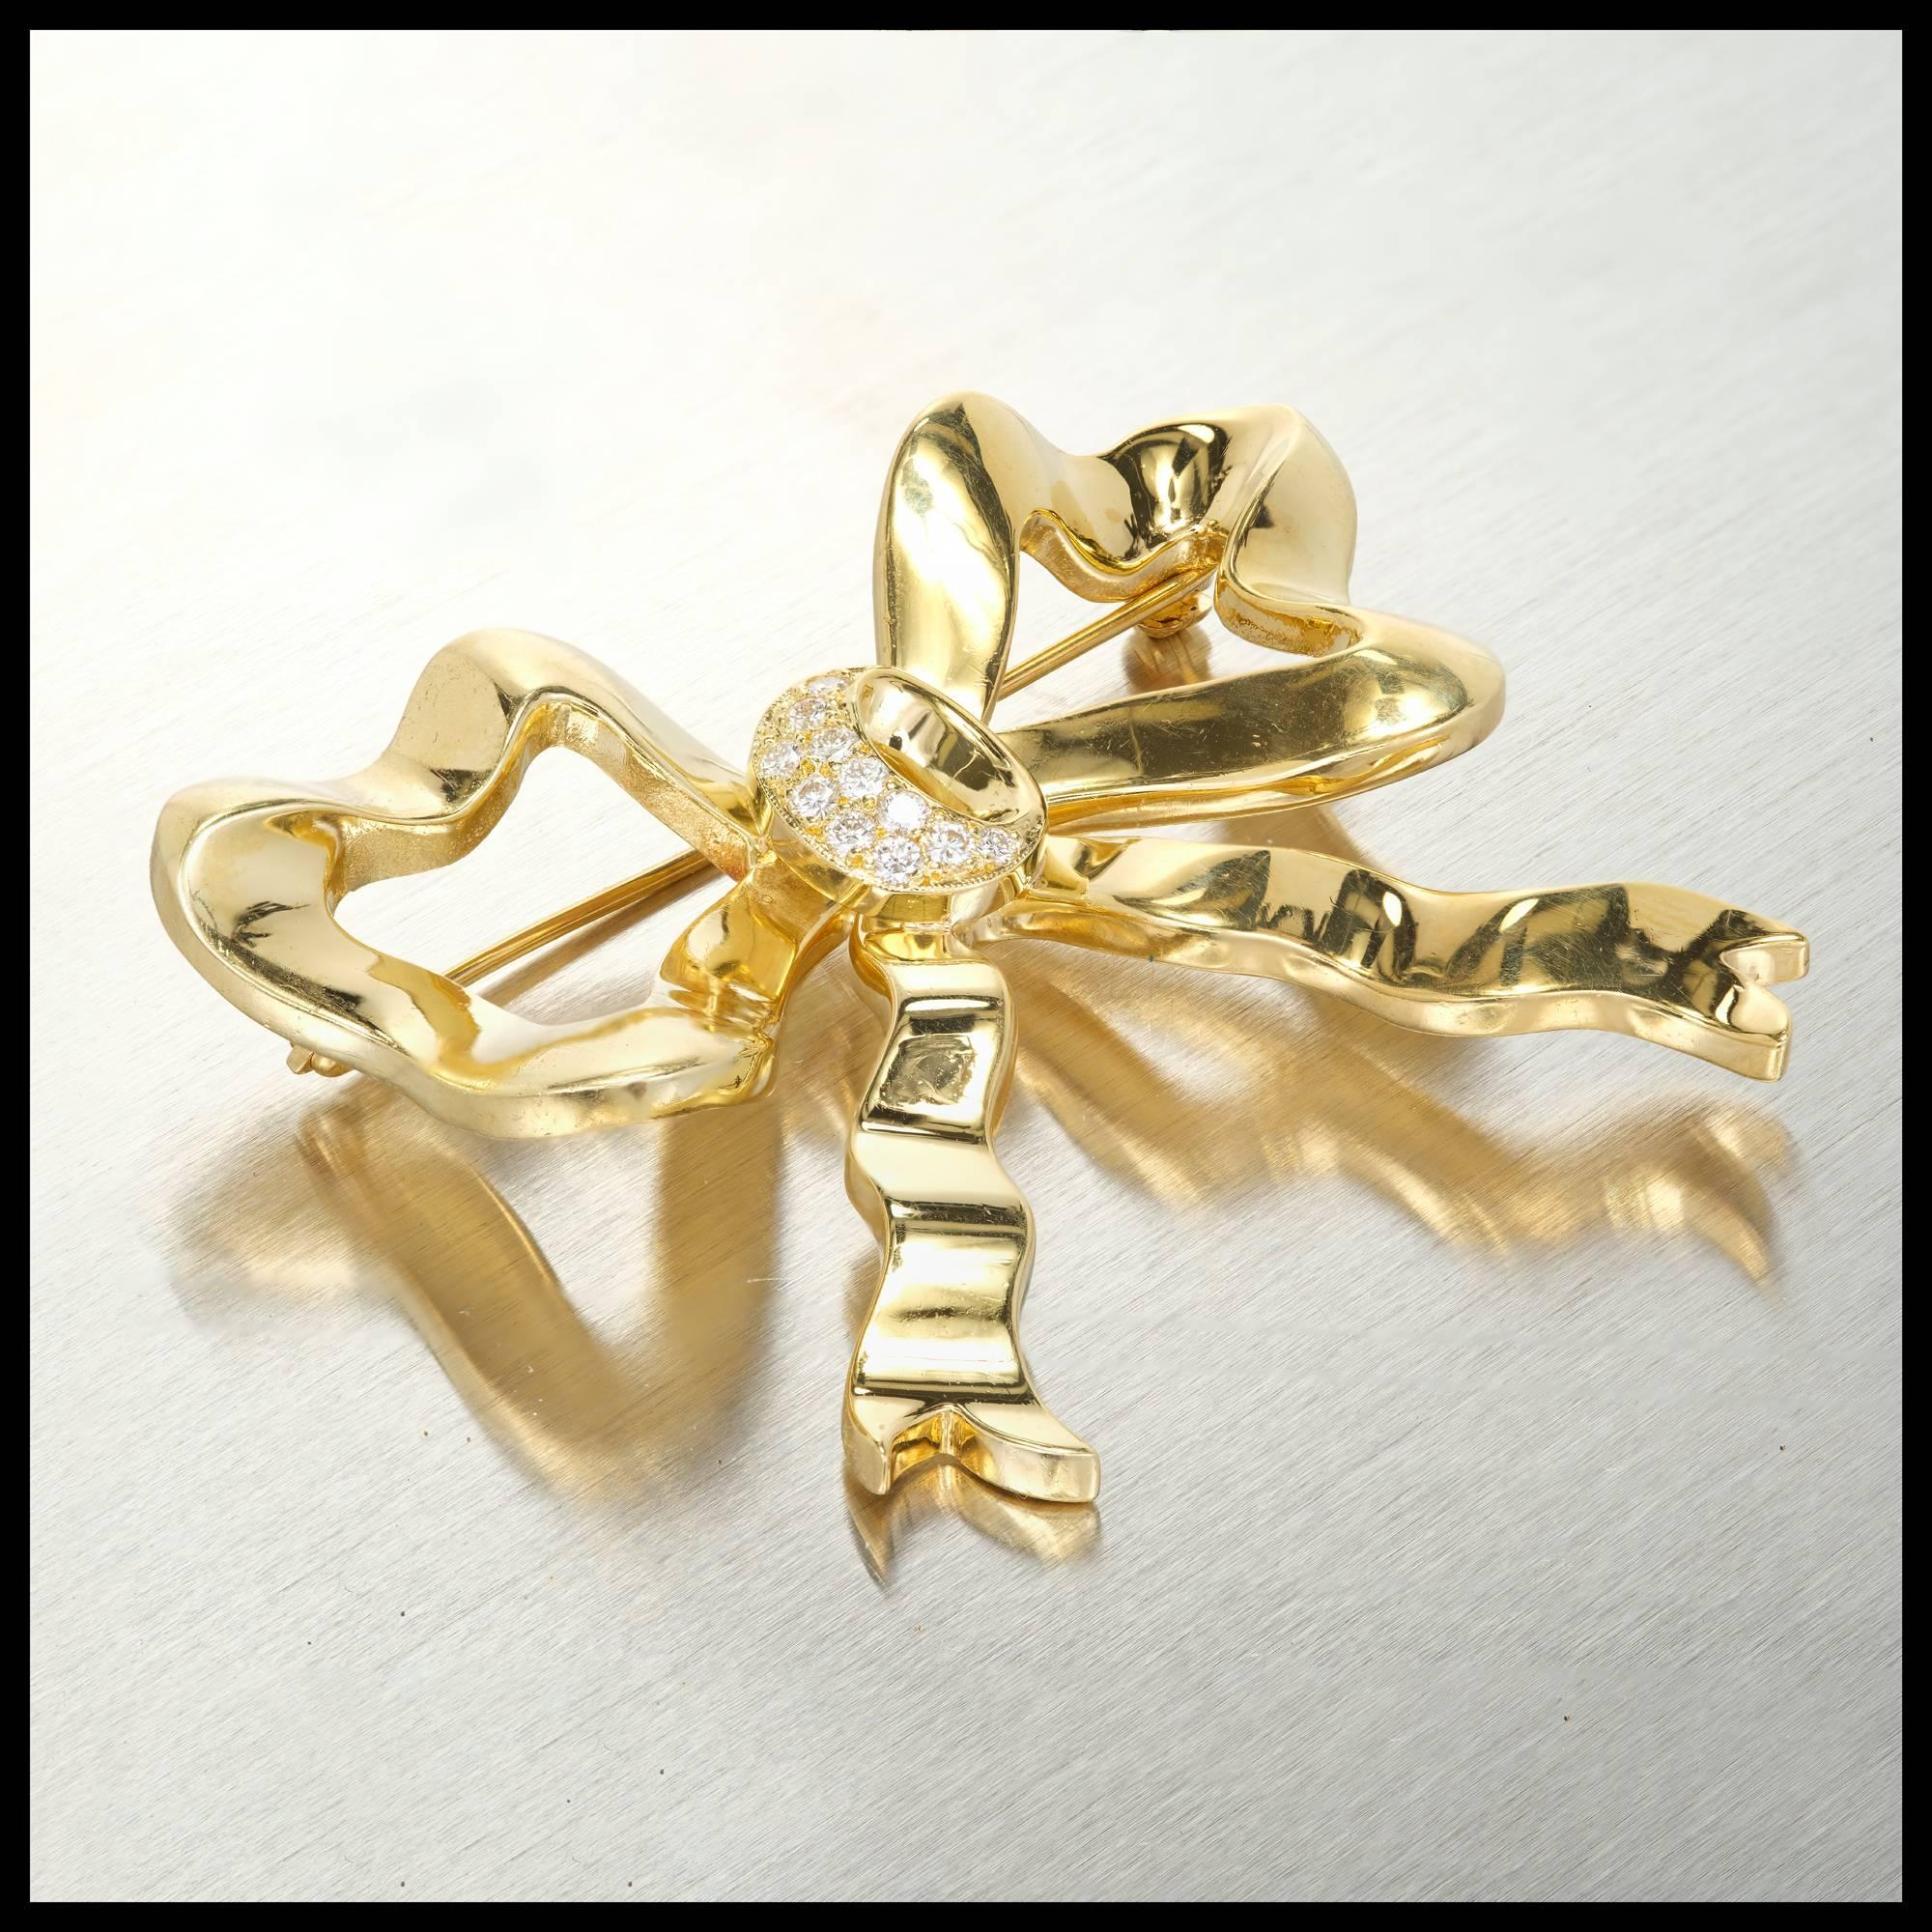 Italian designer Cellino 18k yellow gold bow pin circa 1940s with bright white full cut Diamonds.

11 round full cut Diamonds, approx. total weight .20cts, F – G, VS
18k yellow gold
Tested and stamped: 18k
Hallmark: Cellino
Top to bottom: 42.86mm or